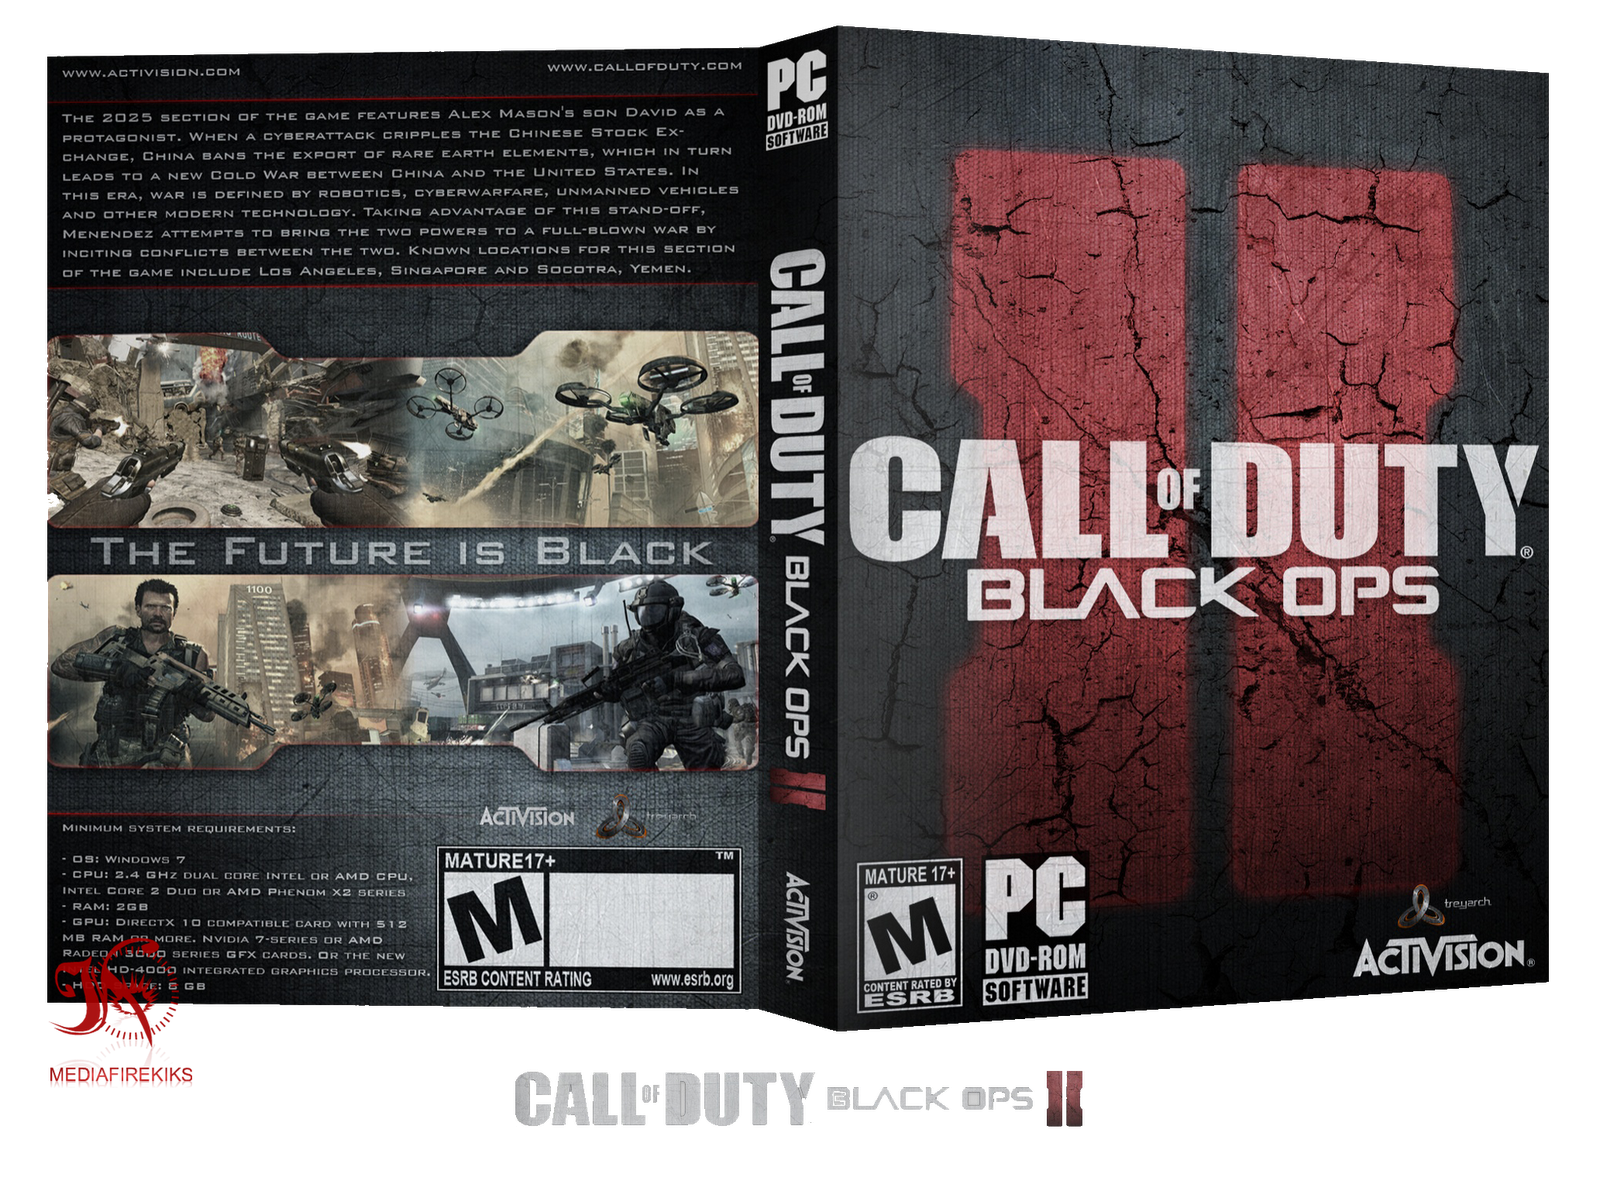 call-of-duty-black-ops-2-crack-file-download